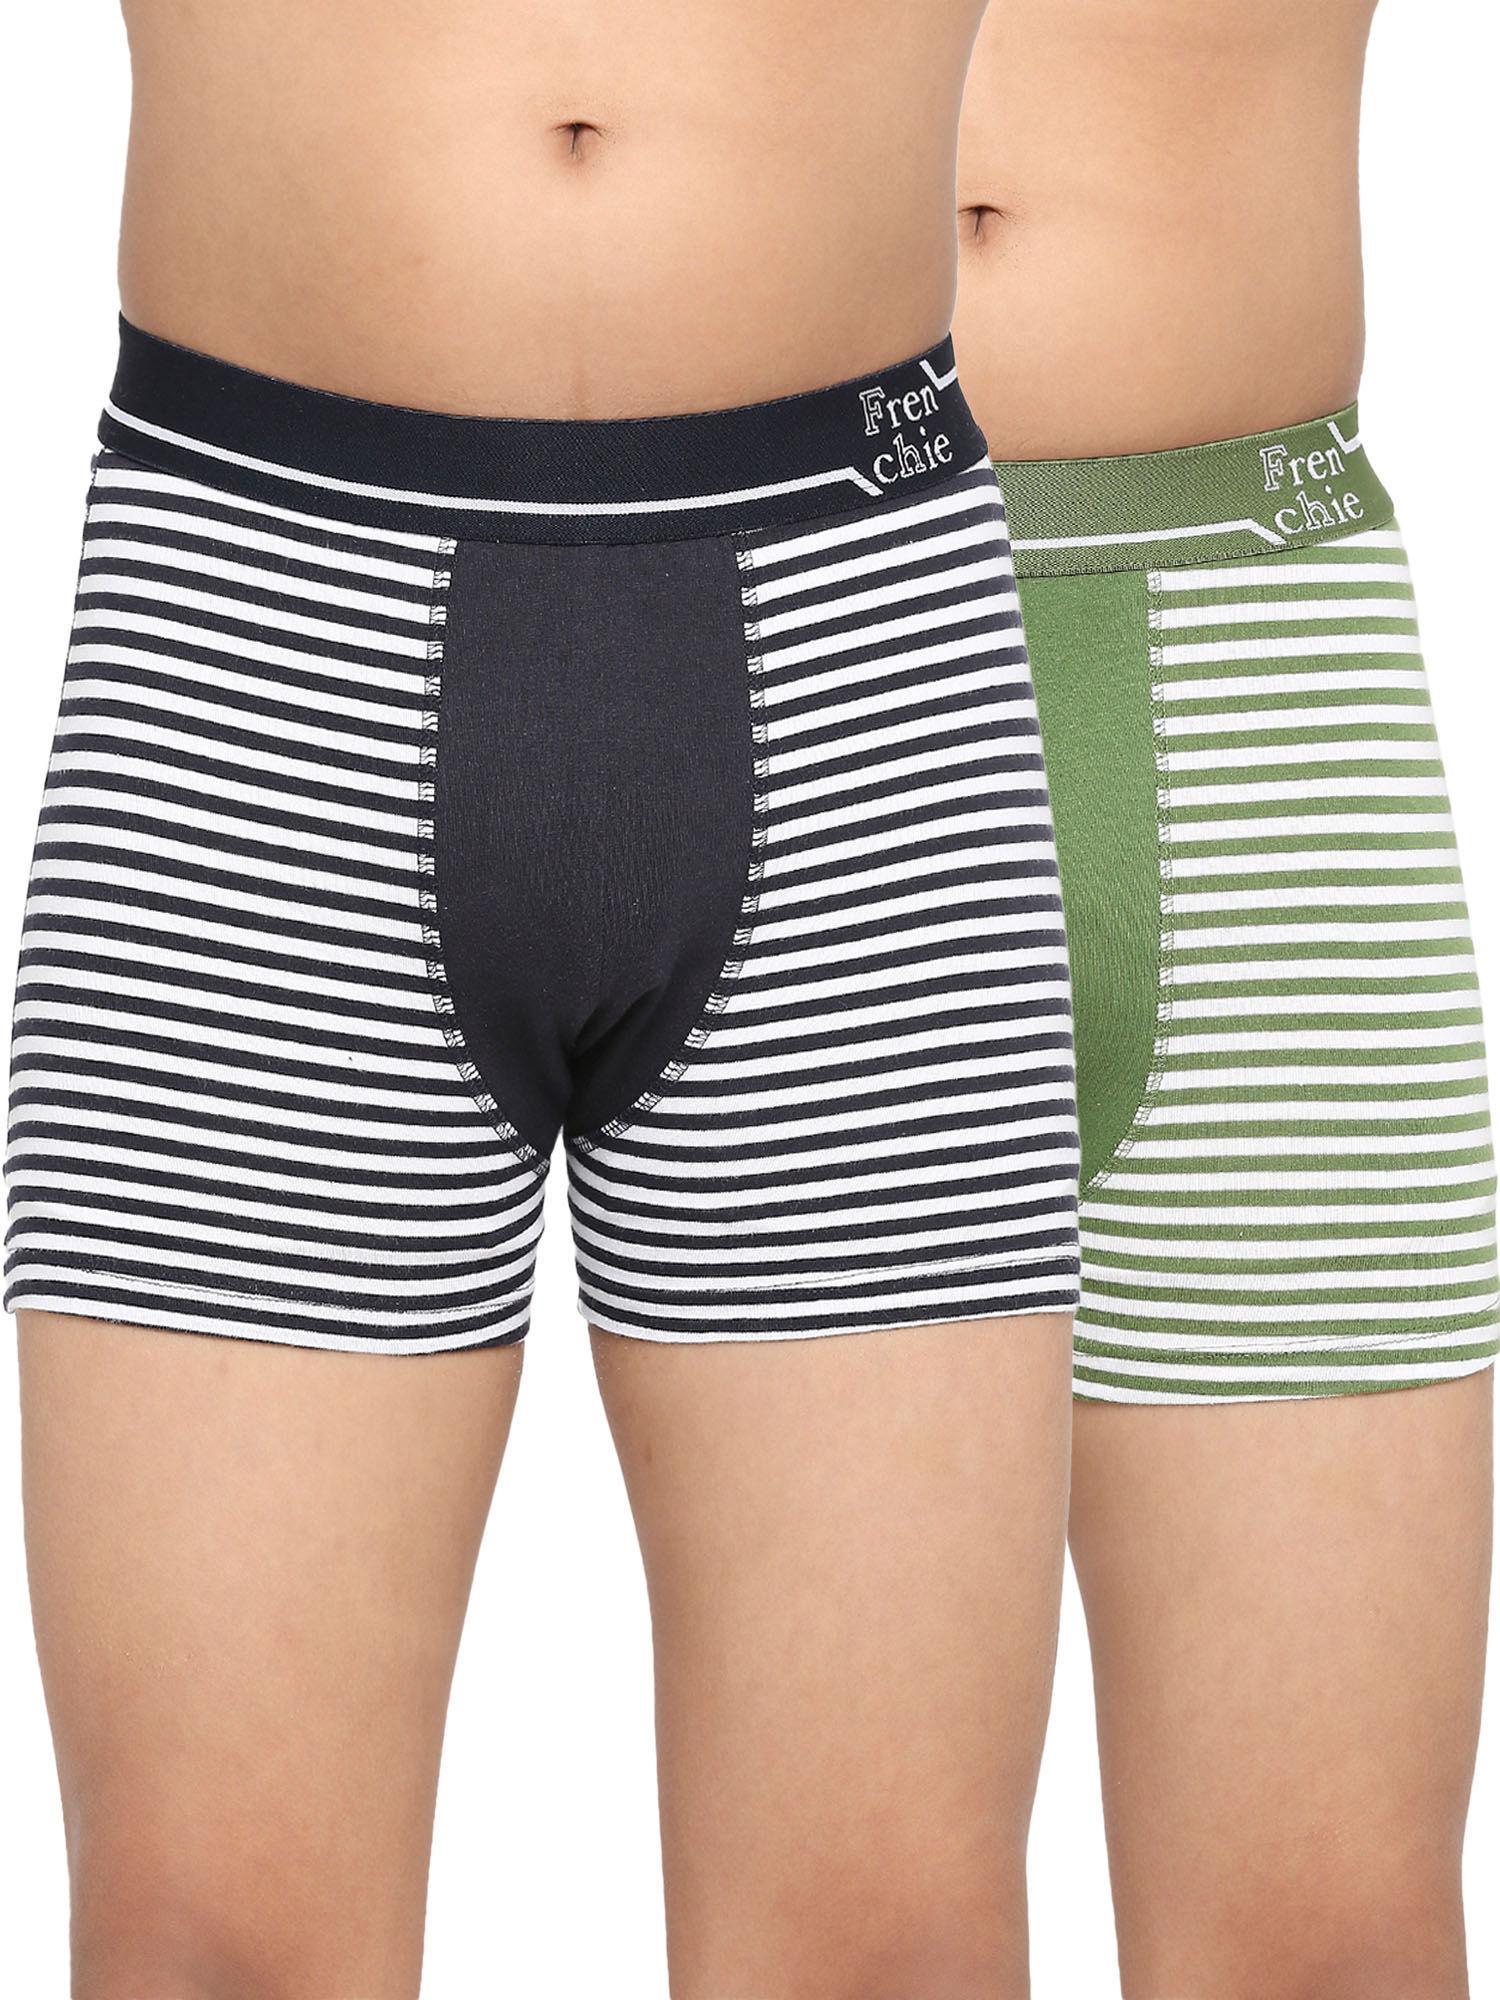 teenagers-cotton-trunk-navy-blue-and-green-(pack-of-2)